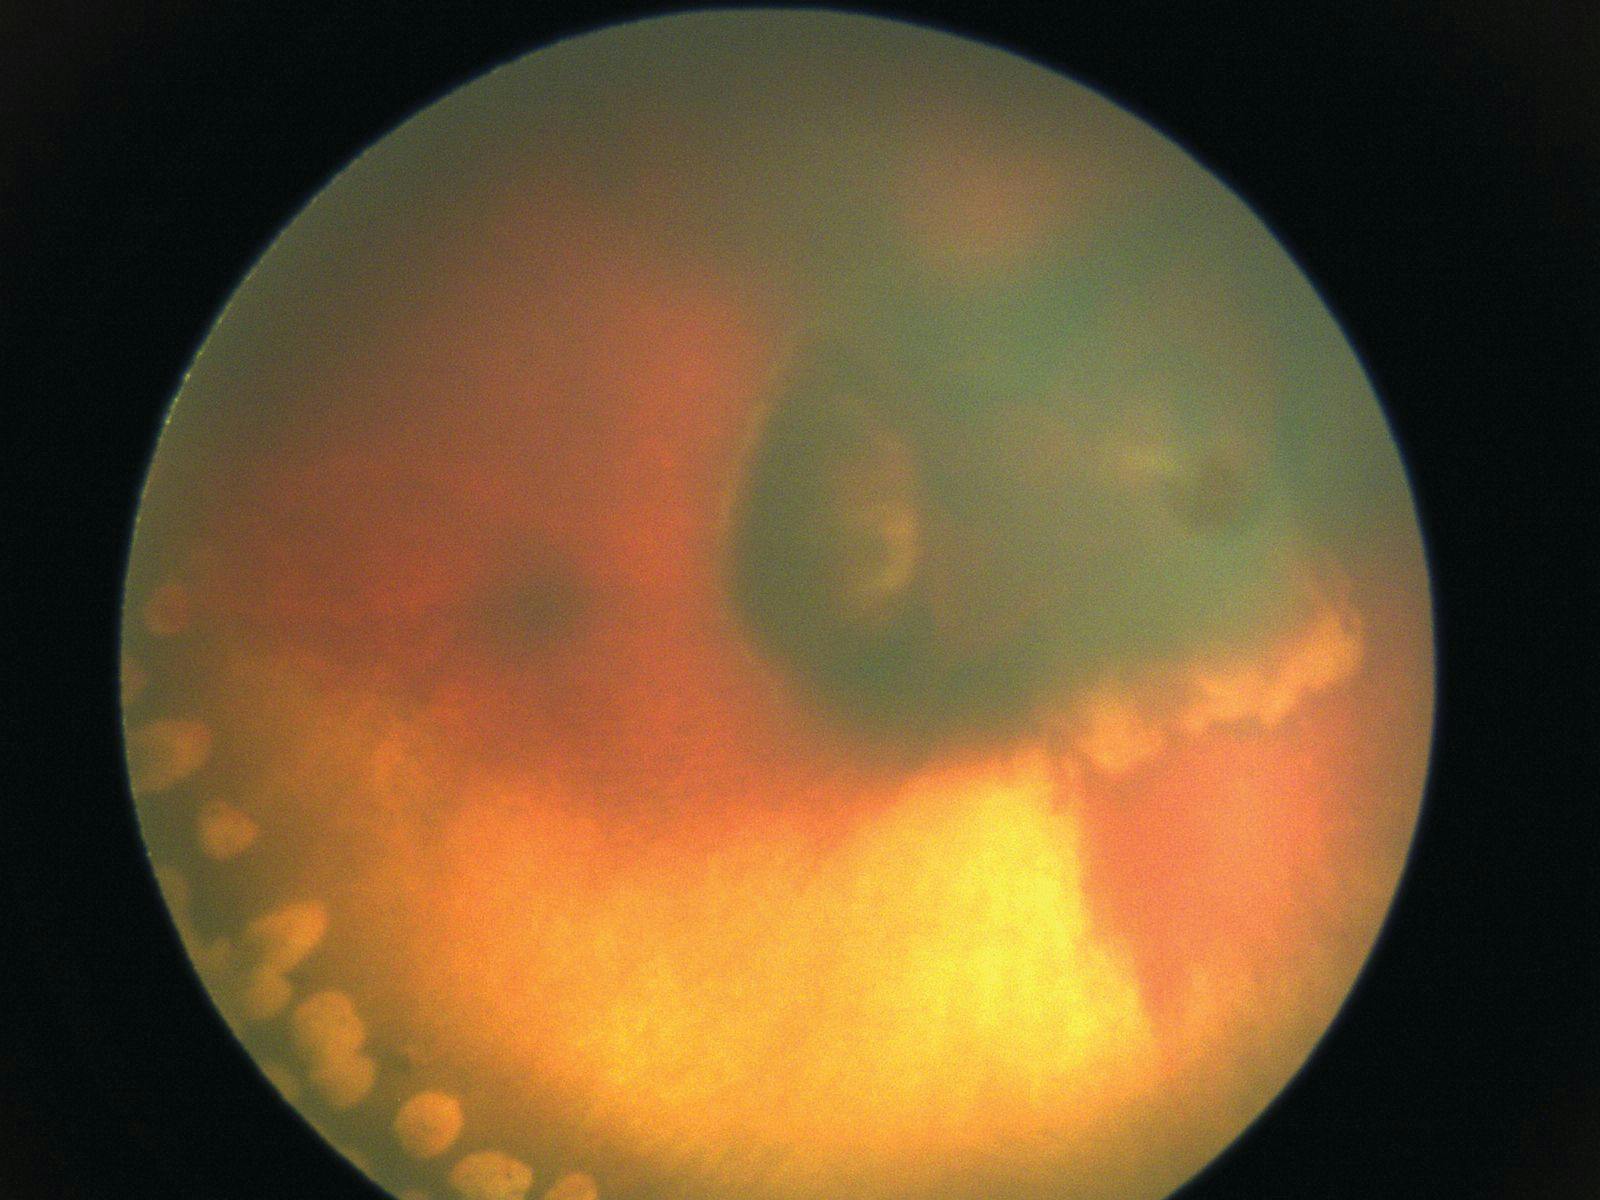 Fundus photo 1 month following laser treatment for Norrie disease. (Image courtesy of Dr Janet L. Alexander)